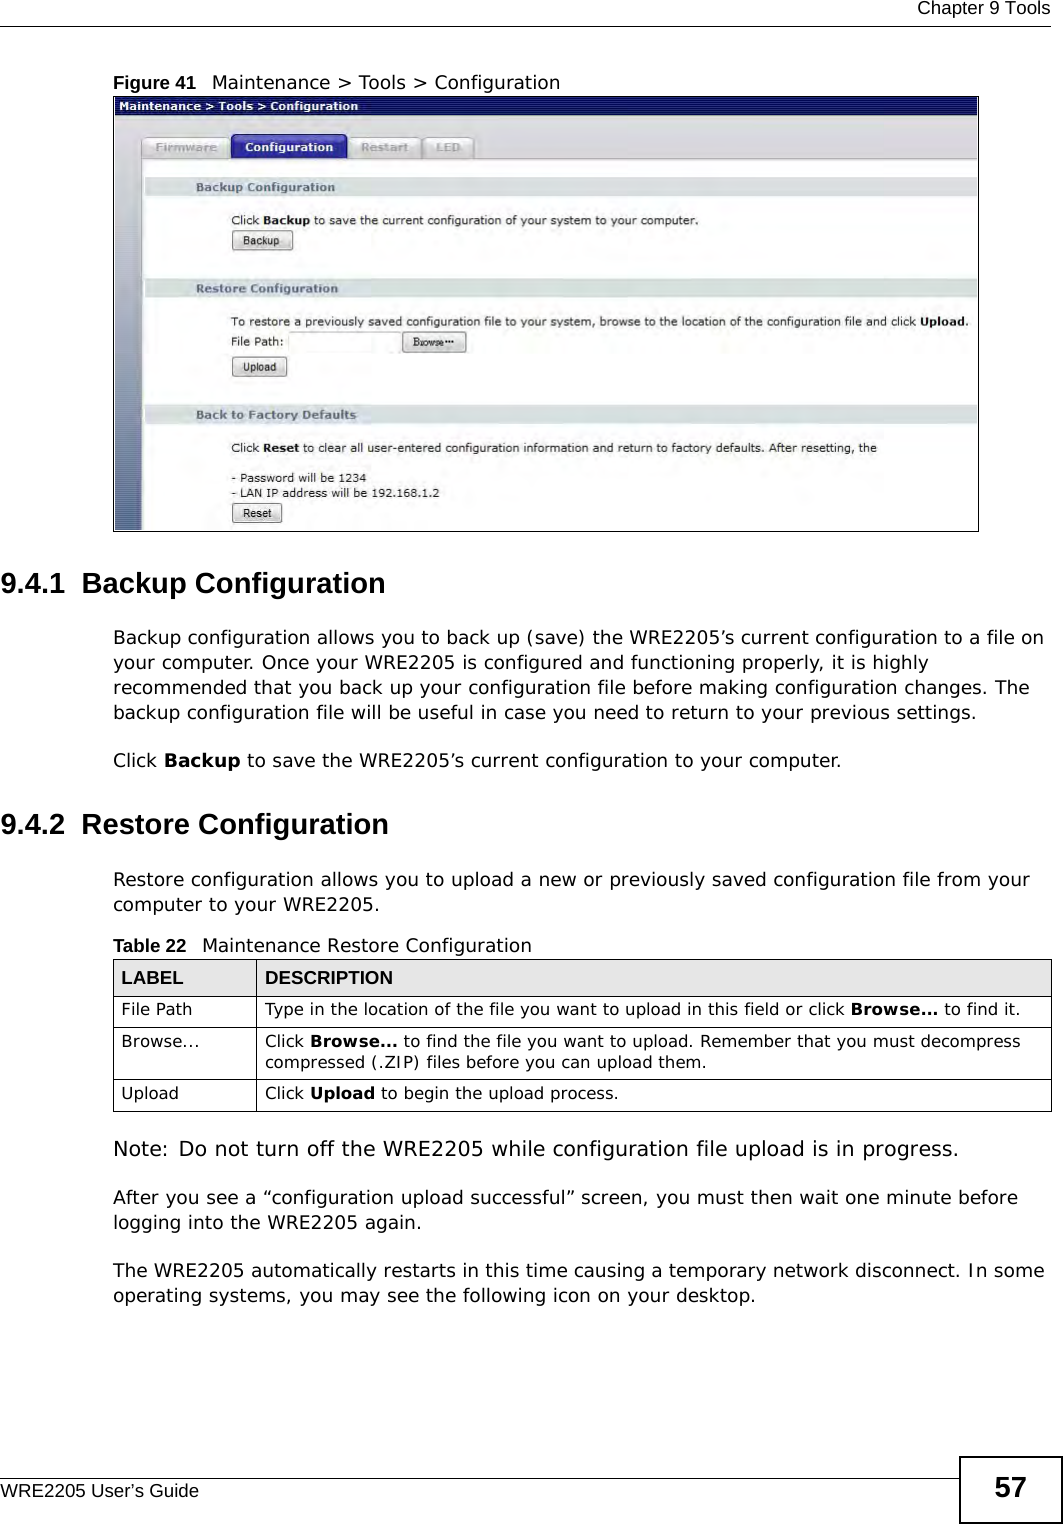  Chapter 9 ToolsWRE2205 User’s Guide 57Figure 41   Maintenance &gt; Tools &gt; Configuration 9.4.1  Backup ConfigurationBackup configuration allows you to back up (save) the WRE2205’s current configuration to a file on your computer. Once your WRE2205 is configured and functioning properly, it is highly recommended that you back up your configuration file before making configuration changes. The backup configuration file will be useful in case you need to return to your previous settings. Click Backup to save the WRE2205’s current configuration to your computer.9.4.2  Restore ConfigurationRestore configuration allows you to upload a new or previously saved configuration file from your computer to your WRE2205.Note: Do not turn off the WRE2205 while configuration file upload is in progress.After you see a “configuration upload successful” screen, you must then wait one minute before logging into the WRE2205 again. The WRE2205 automatically restarts in this time causing a temporary network disconnect. In some operating systems, you may see the following icon on your desktop.Table 22   Maintenance Restore ConfigurationLABEL DESCRIPTIONFile Path  Type in the location of the file you want to upload in this field or click Browse... to find it.Browse...  Click Browse... to find the file you want to upload. Remember that you must decompress compressed (.ZIP) files before you can upload them. Upload  Click Upload to begin the upload process.